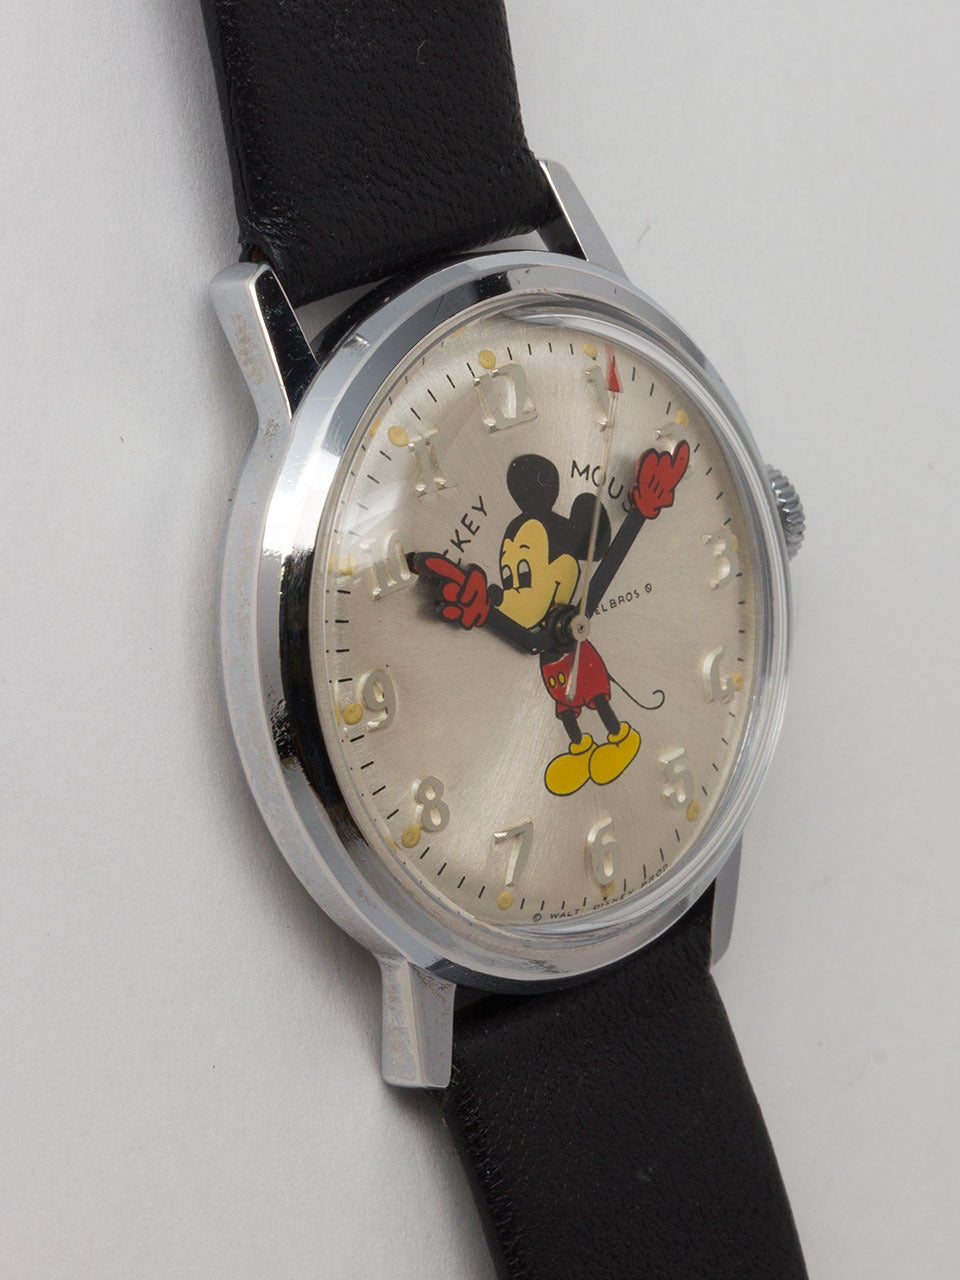 Adult-sized Helbros stainless steel and base metal Mickey Mouse wristwatch, circa 1970s. 34 x 40mm screw back case with acrylic crystal. Lovely silvered satin dial with raised Arabic numbers, colorful image of Mickey with animated red gloved hands.